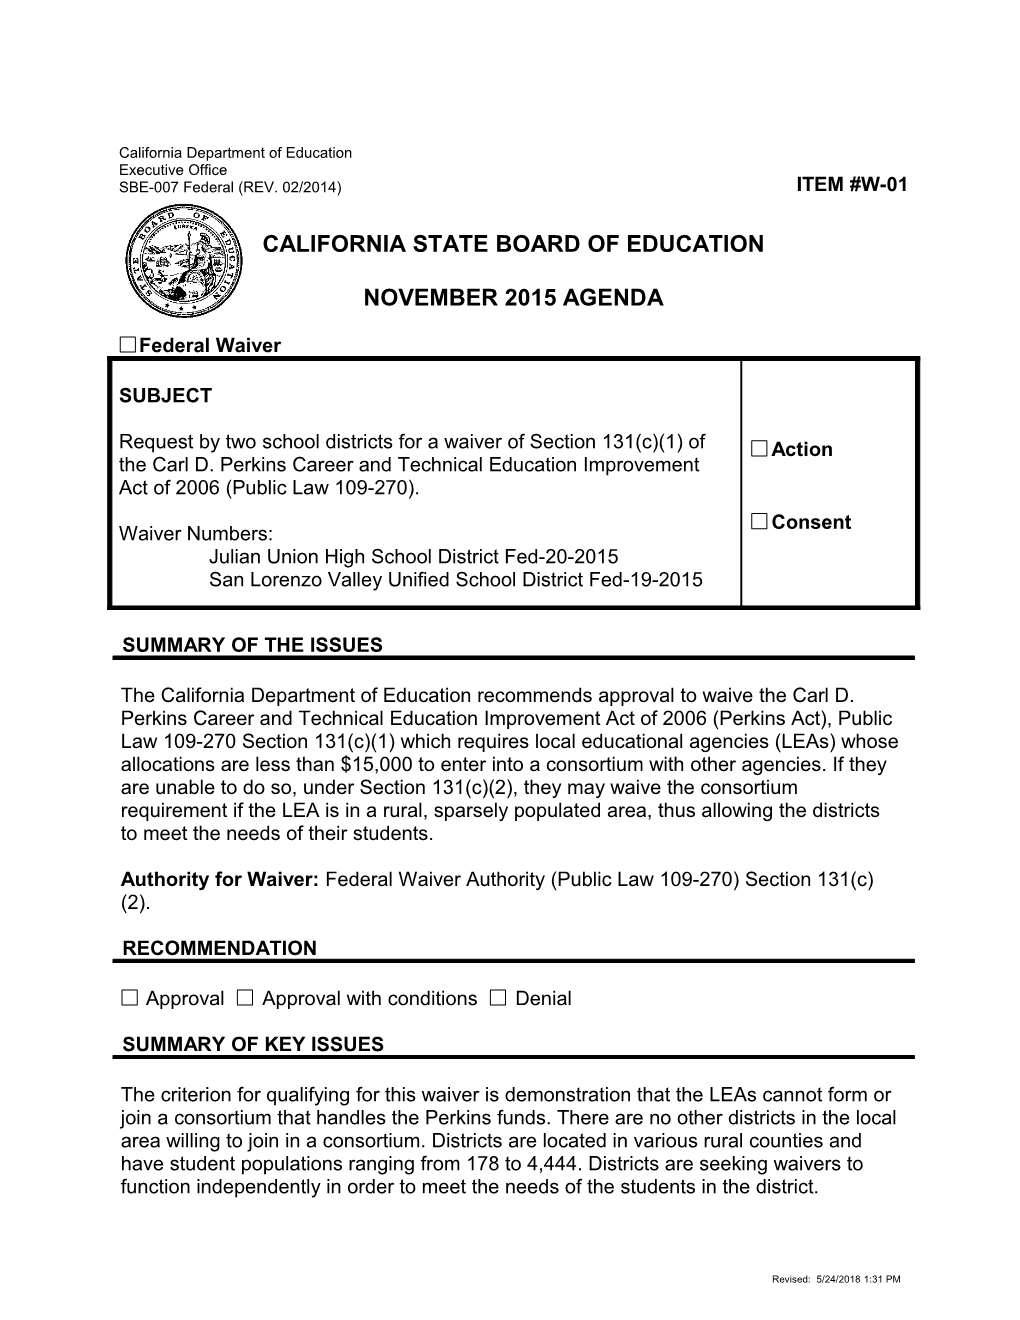 November 2015 Waiver Item W-01 - Meeting Agendas (CA State Board of Education)